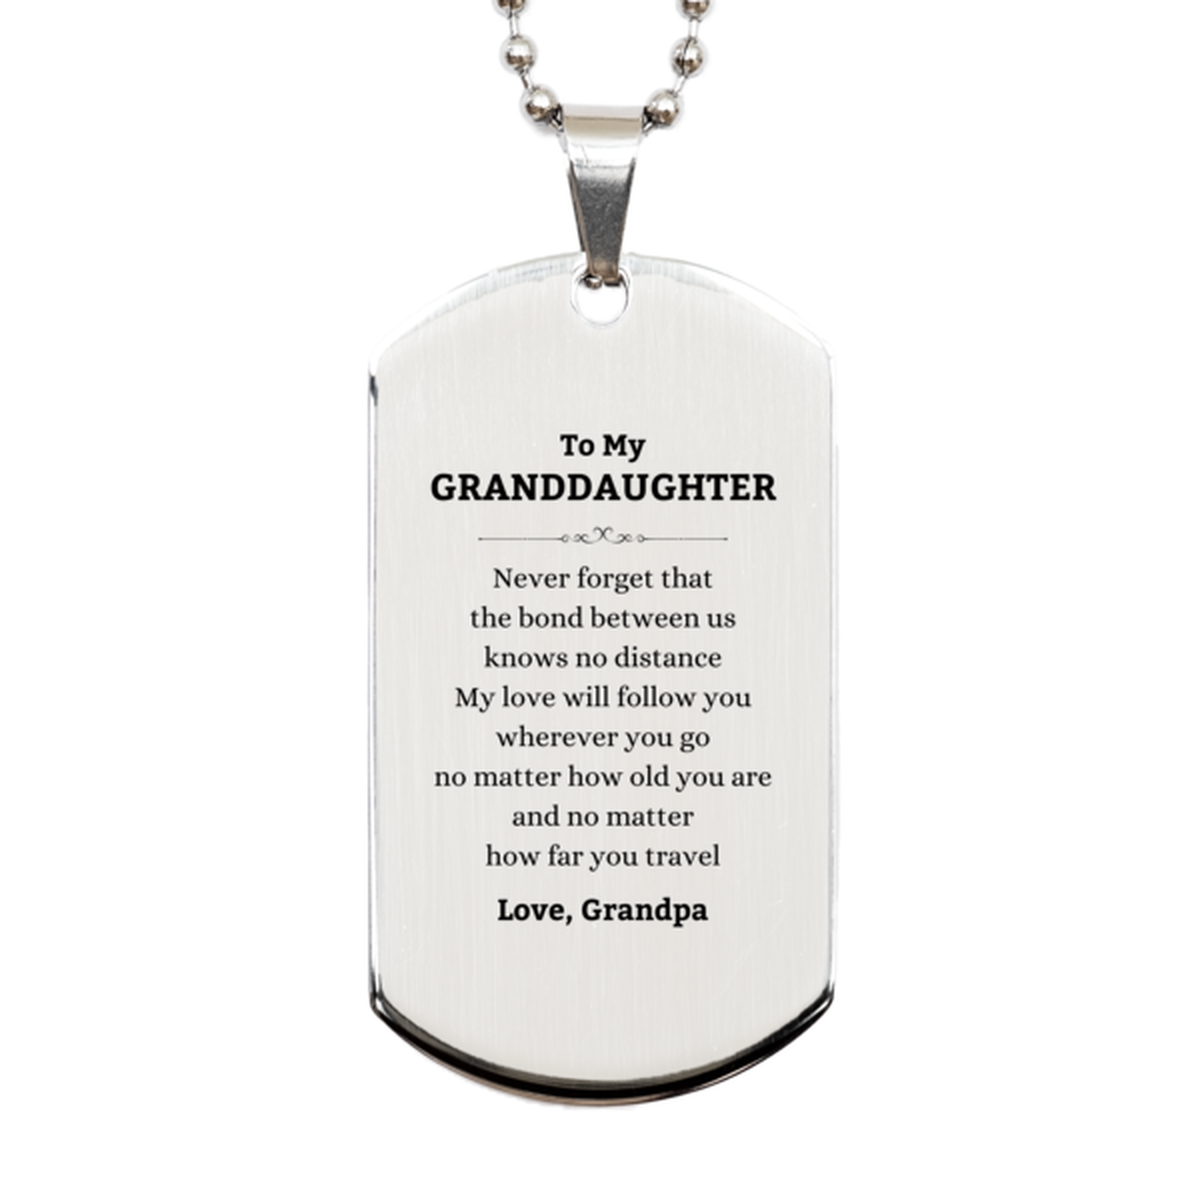 Granddaughter Birthday Gifts from Grandpa, Adjustable Silver Dog Tag for Granddaughter Christmas Graduation Unique Gifts Granddaughter Never forget that the bond between us knows no distance. Love, Grandpa